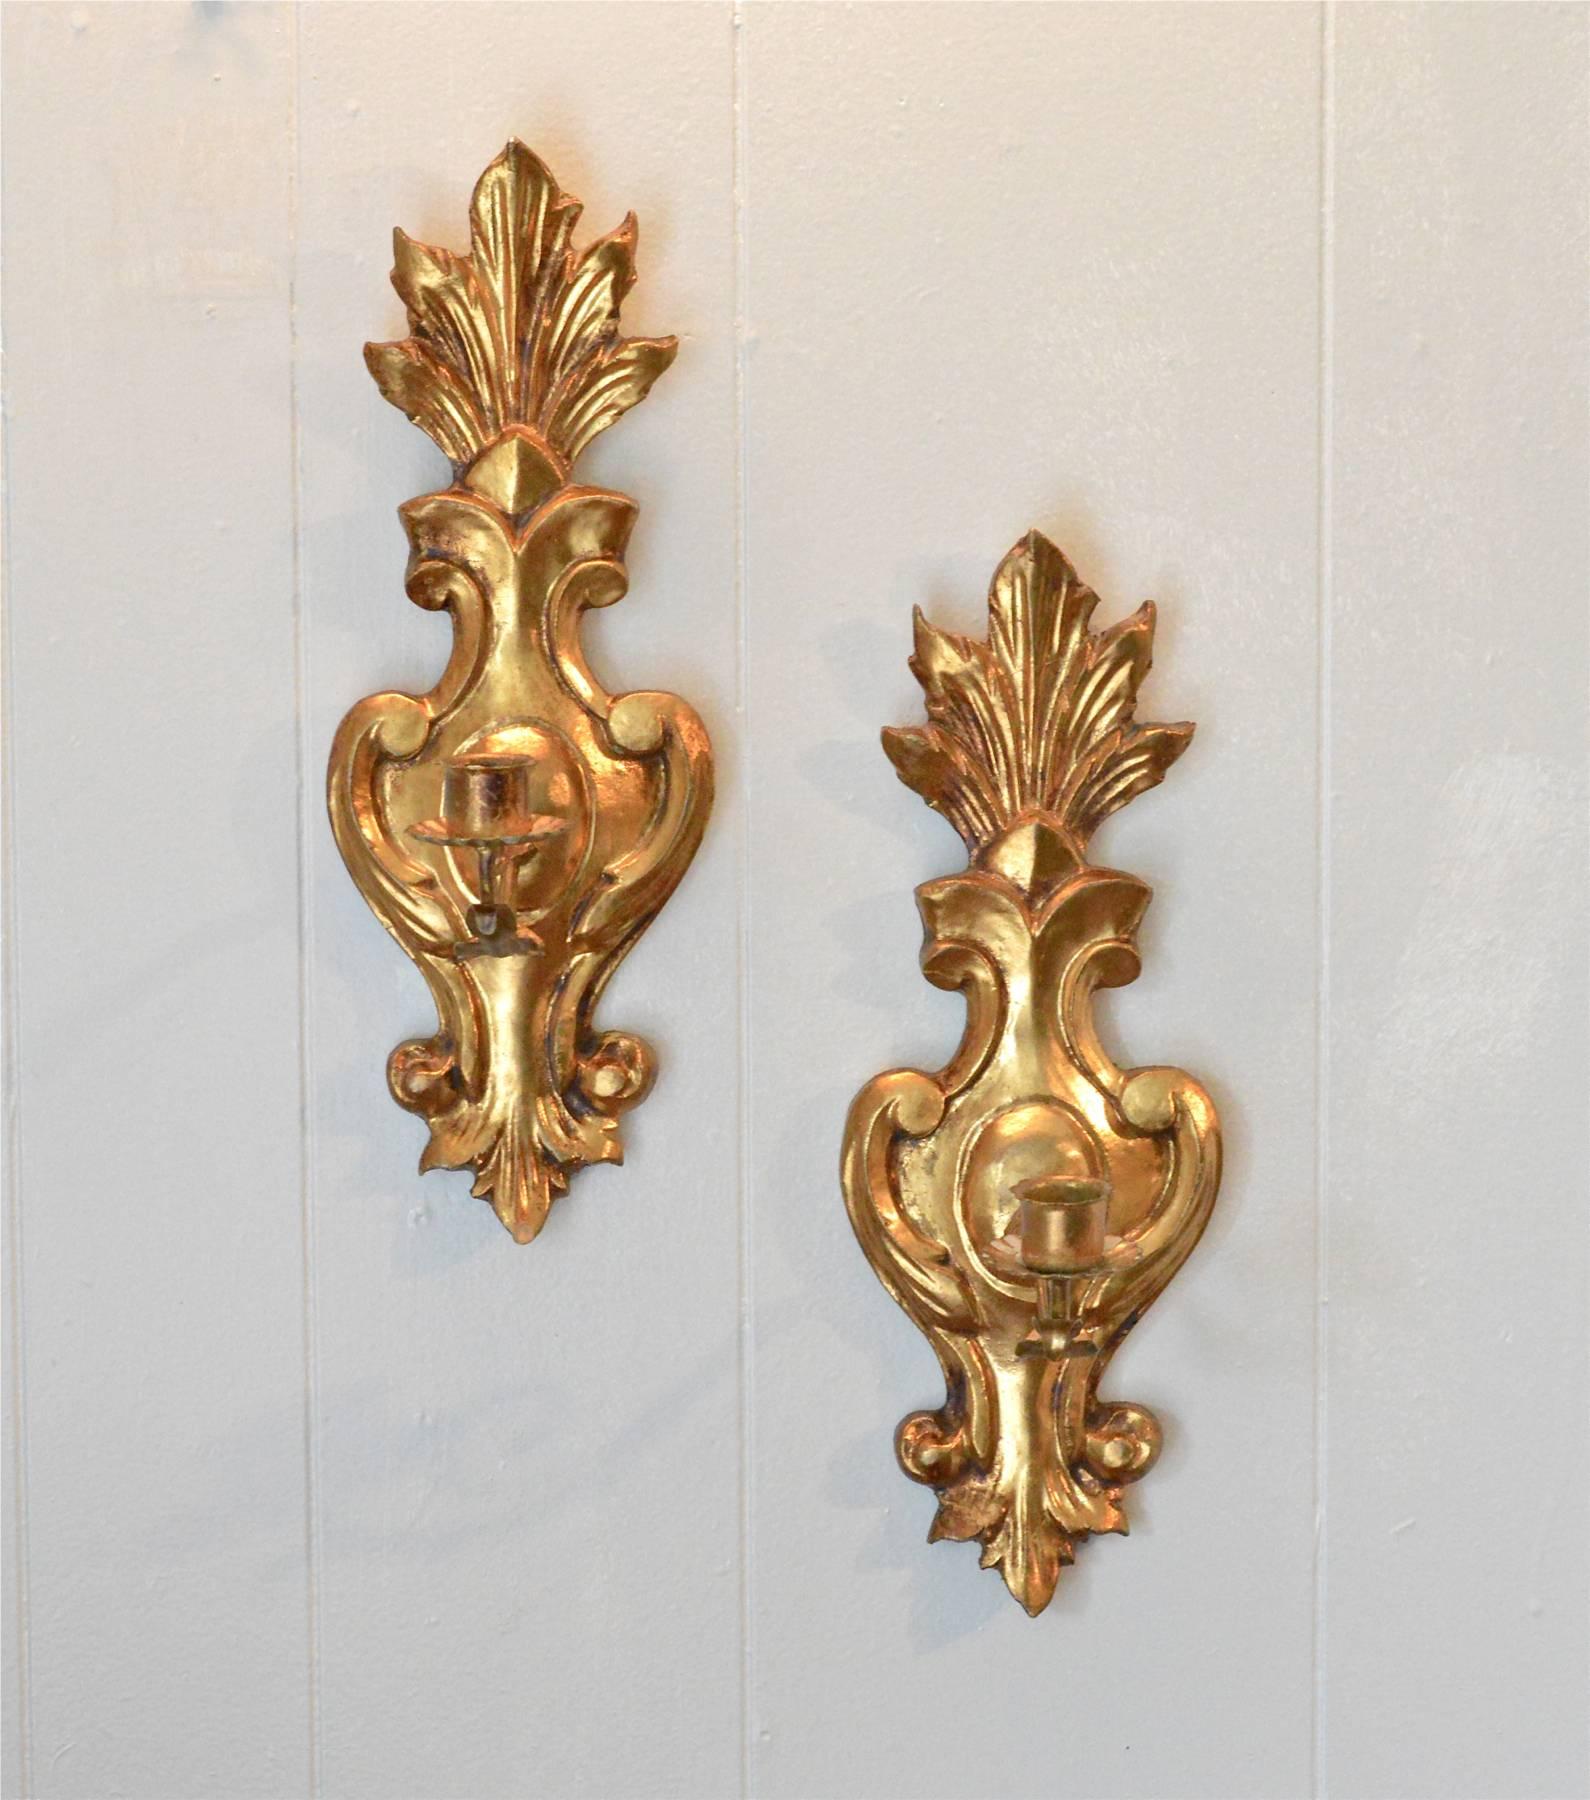 A pair of Italian wall-mounted sconces of Fleur de Lis form. Non-electrified, the water gilt, carved wood forms are simple and stunning. Made in Italy stamps to the back, circa 1960.